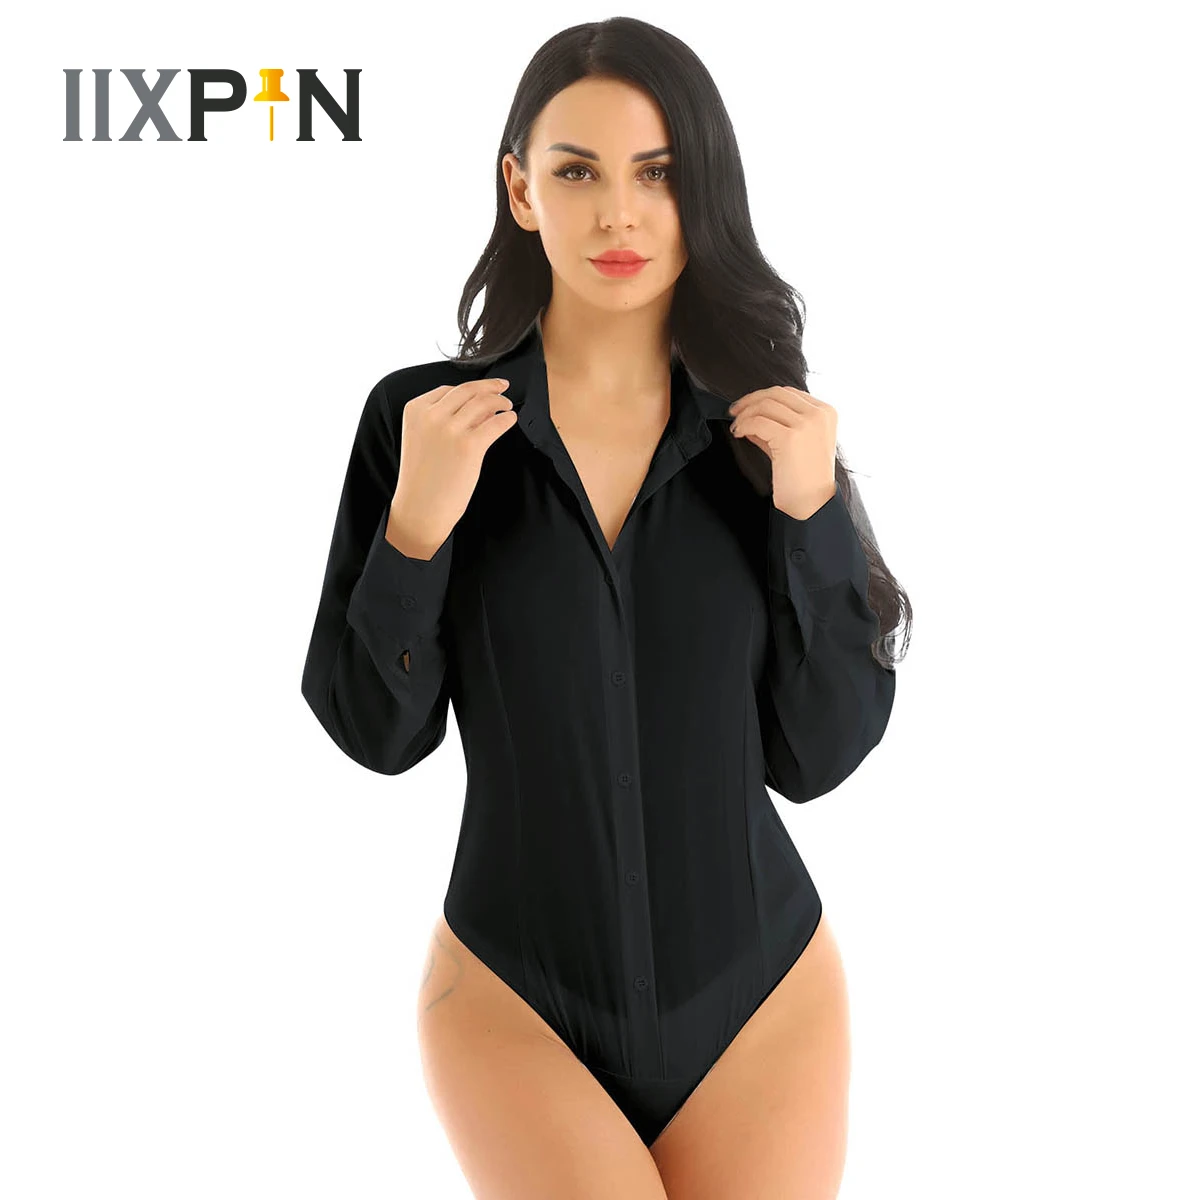 Elegant Bodysuits Female Fashion 2020 Long Sleeve Body Shirts Women Formal Office Lady White Blouses Plus Size Rompers Clothes green bodysuit